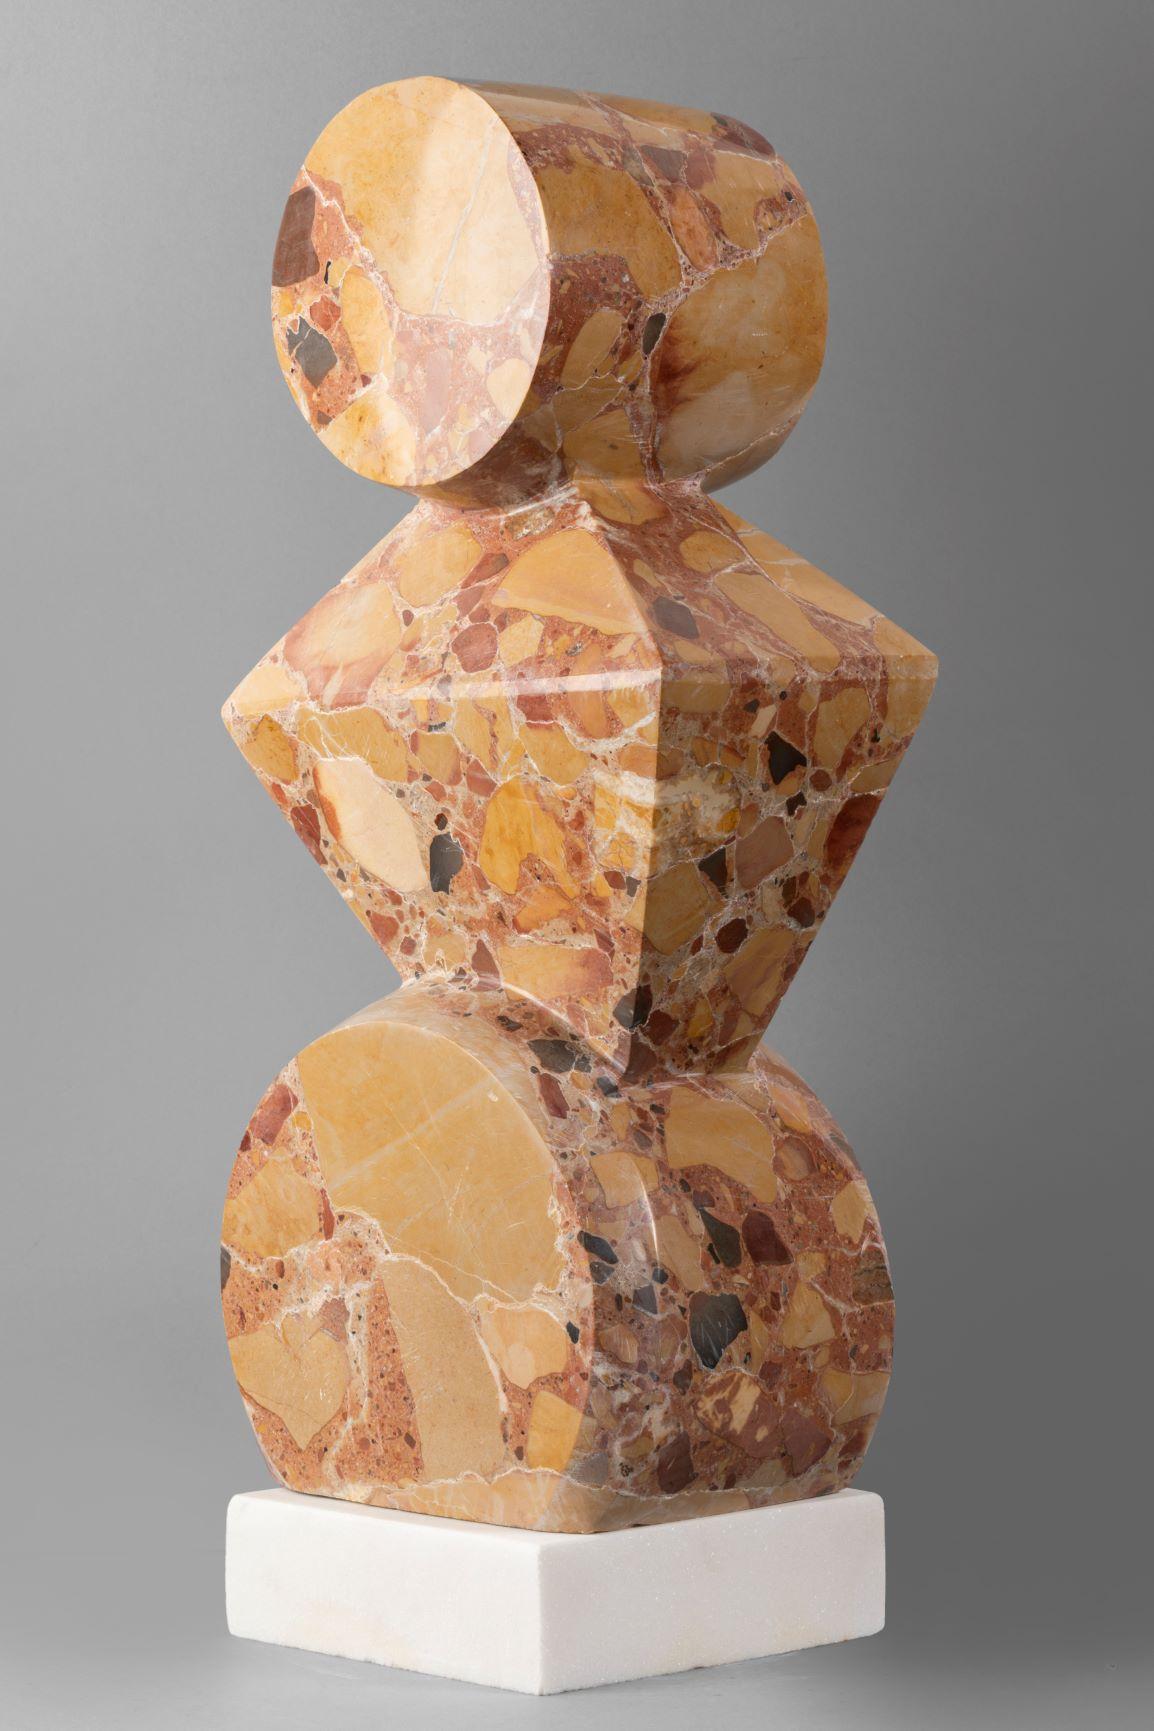 Fabulous marble sculpture by Contemporary Artist, Savy 